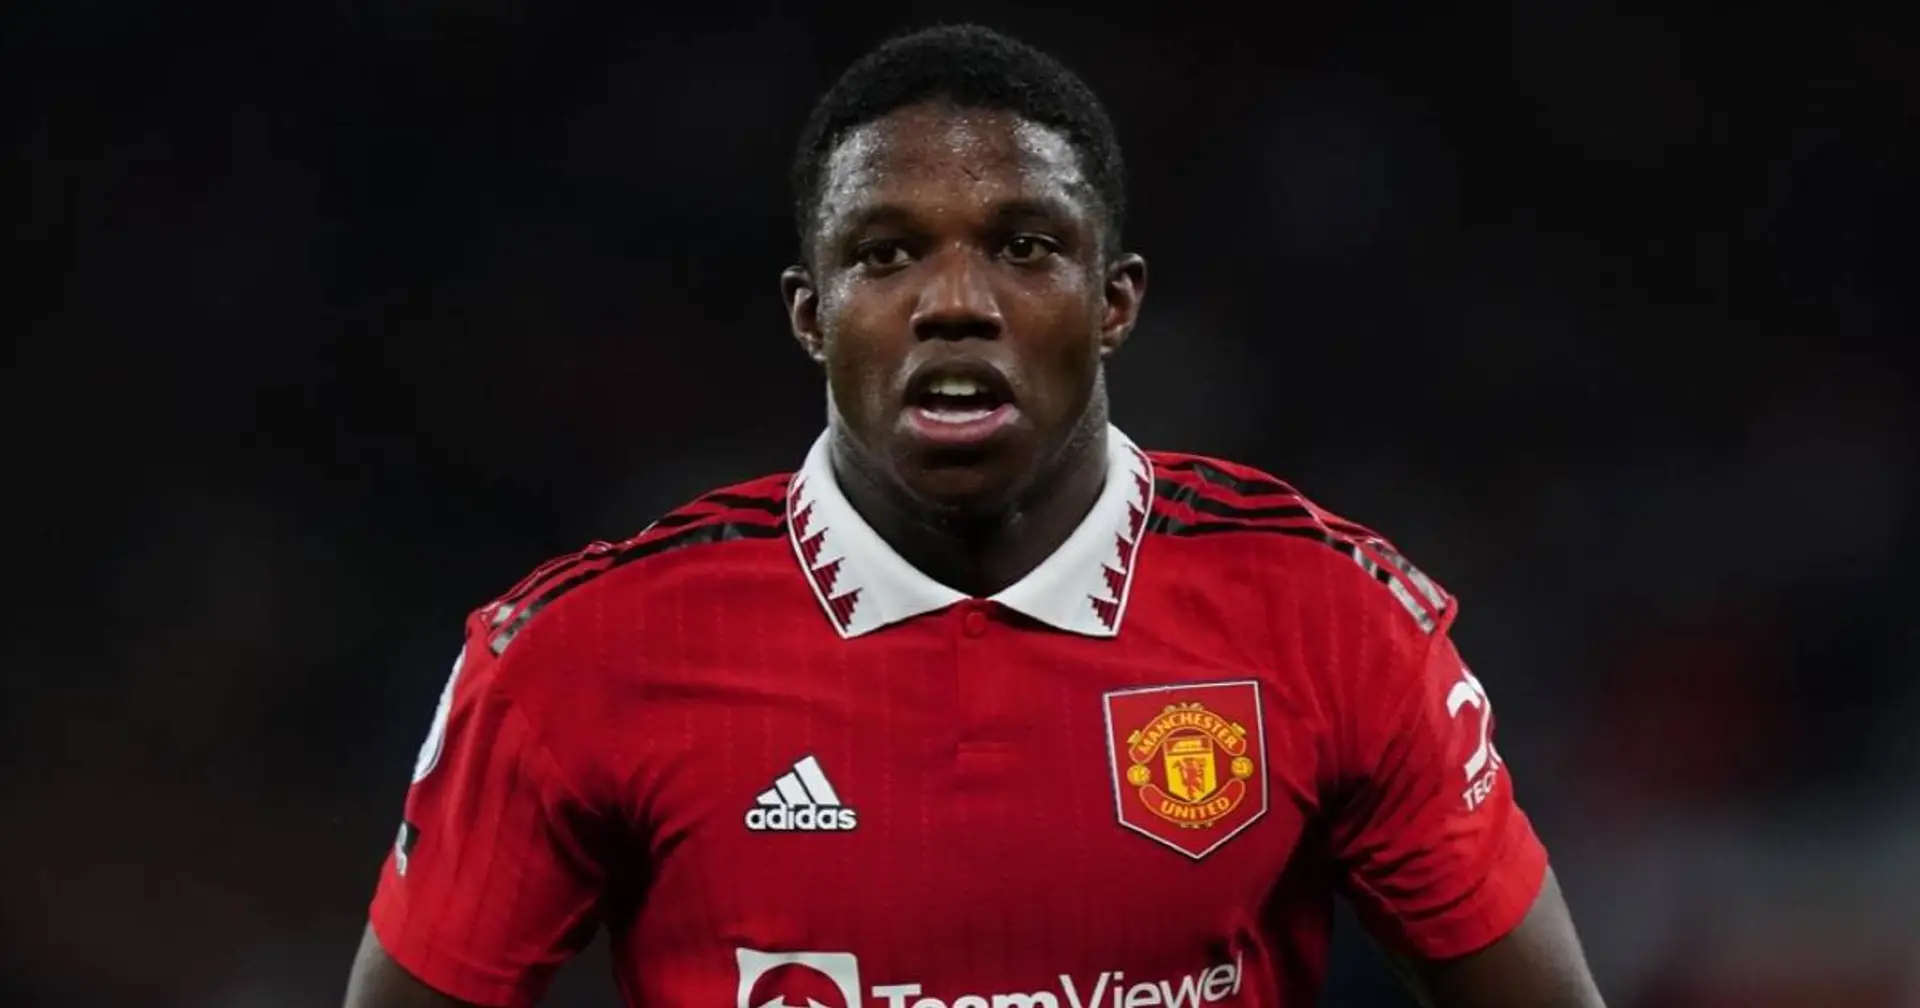 Worrying claim emerges about Tyrell Malacia — shows true state of Man United medical team